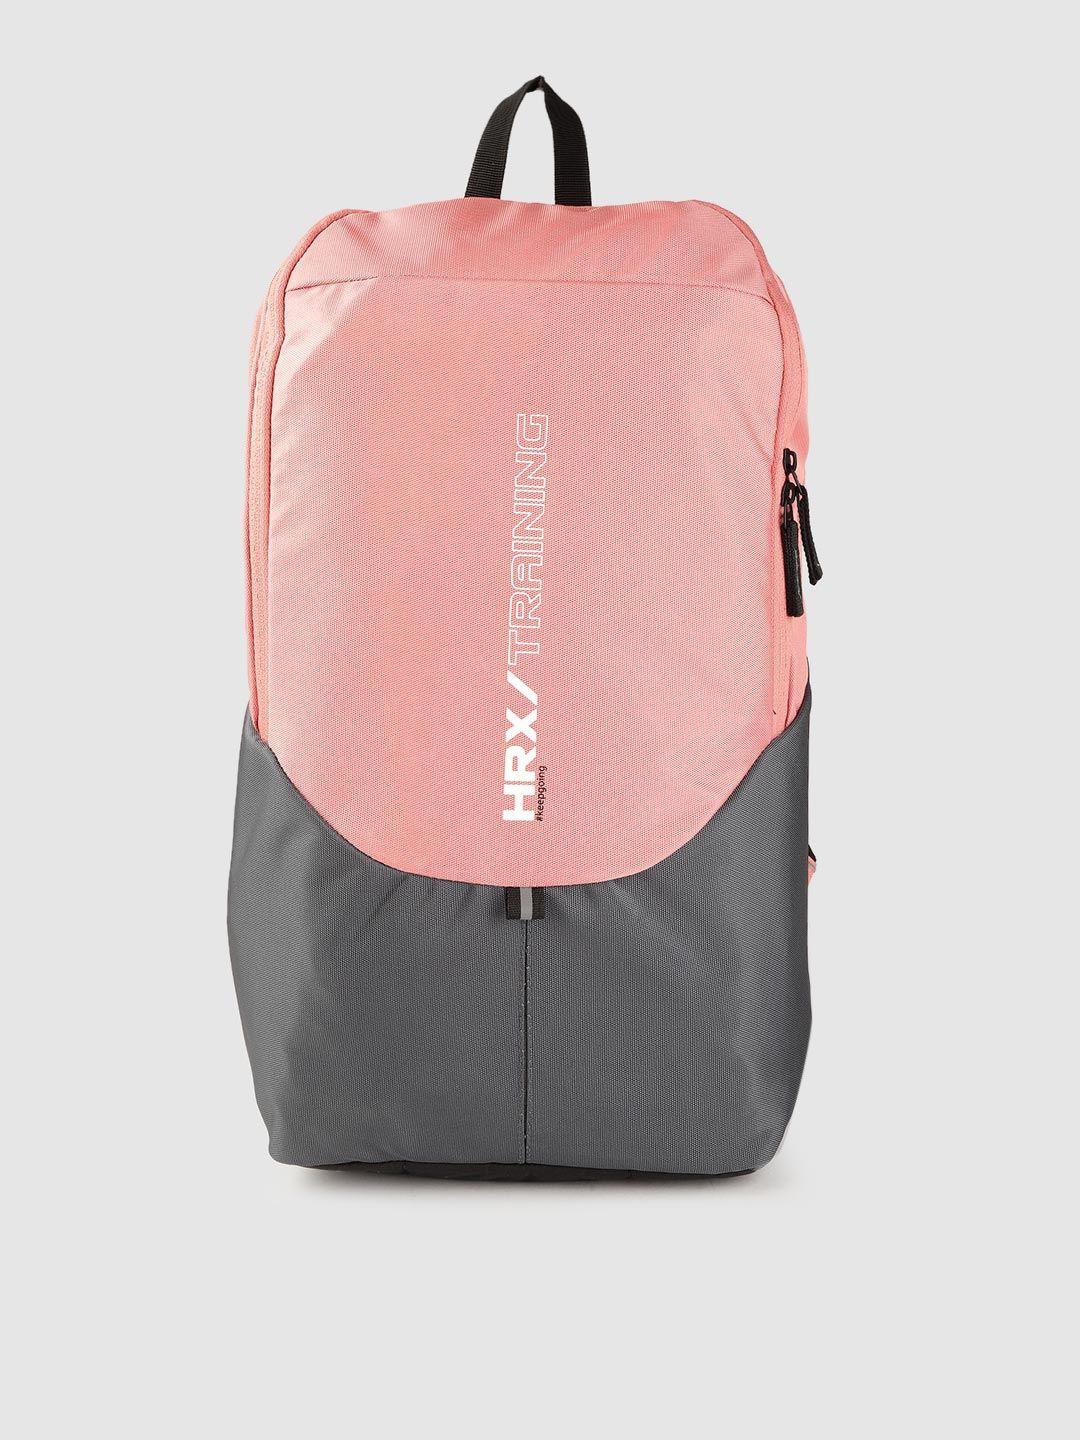 hrx by hrithik roshan unisex pink & charcoal grey colourblocked 16 inch laptop backpack